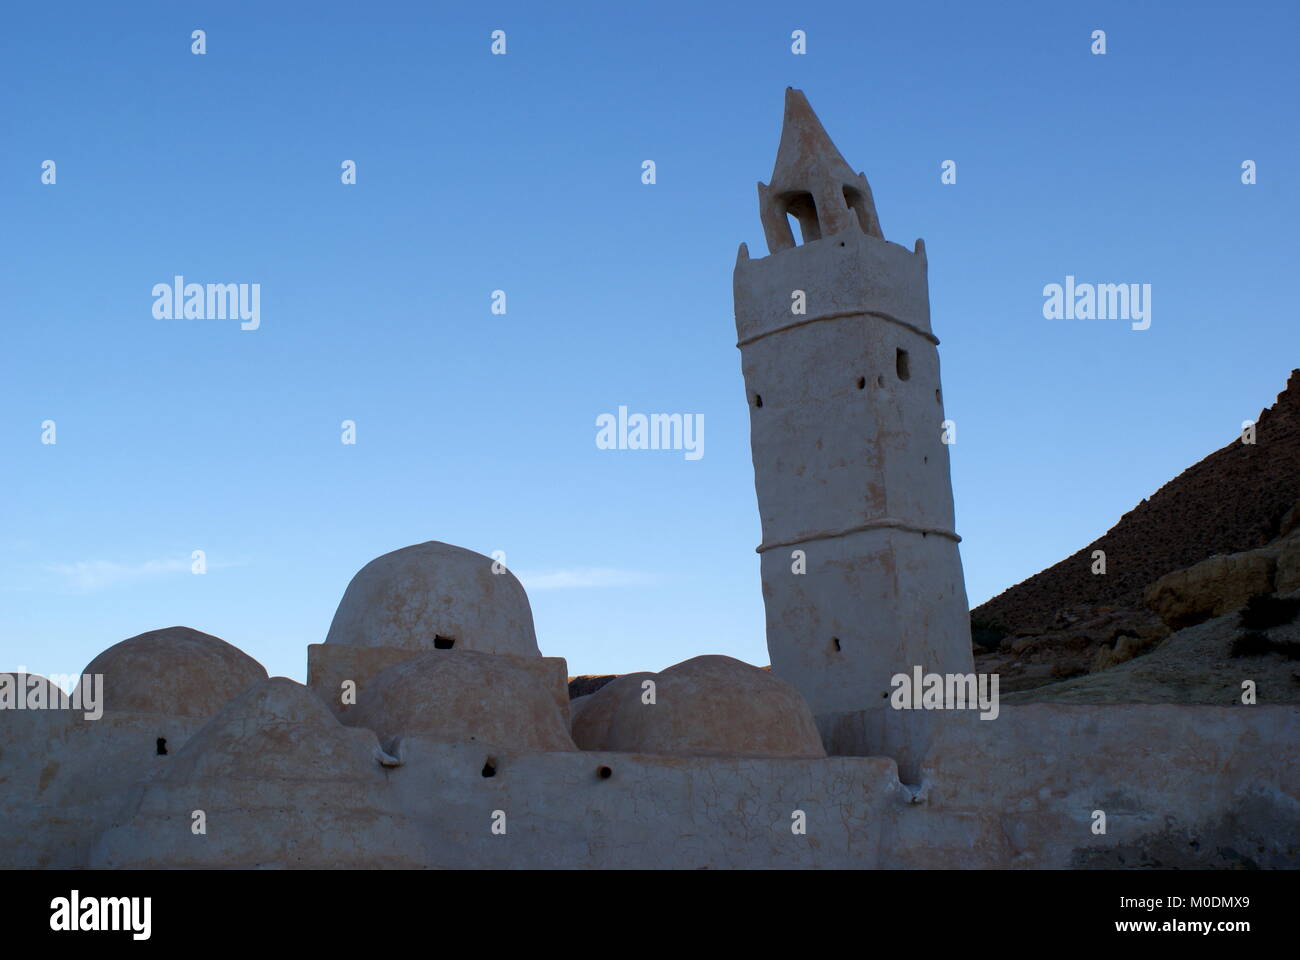 White stone Mosque of the Seven Sleepers silhouetted against the sky at dusk, Chenini, Tataouine district, Tunisia Stock Photo